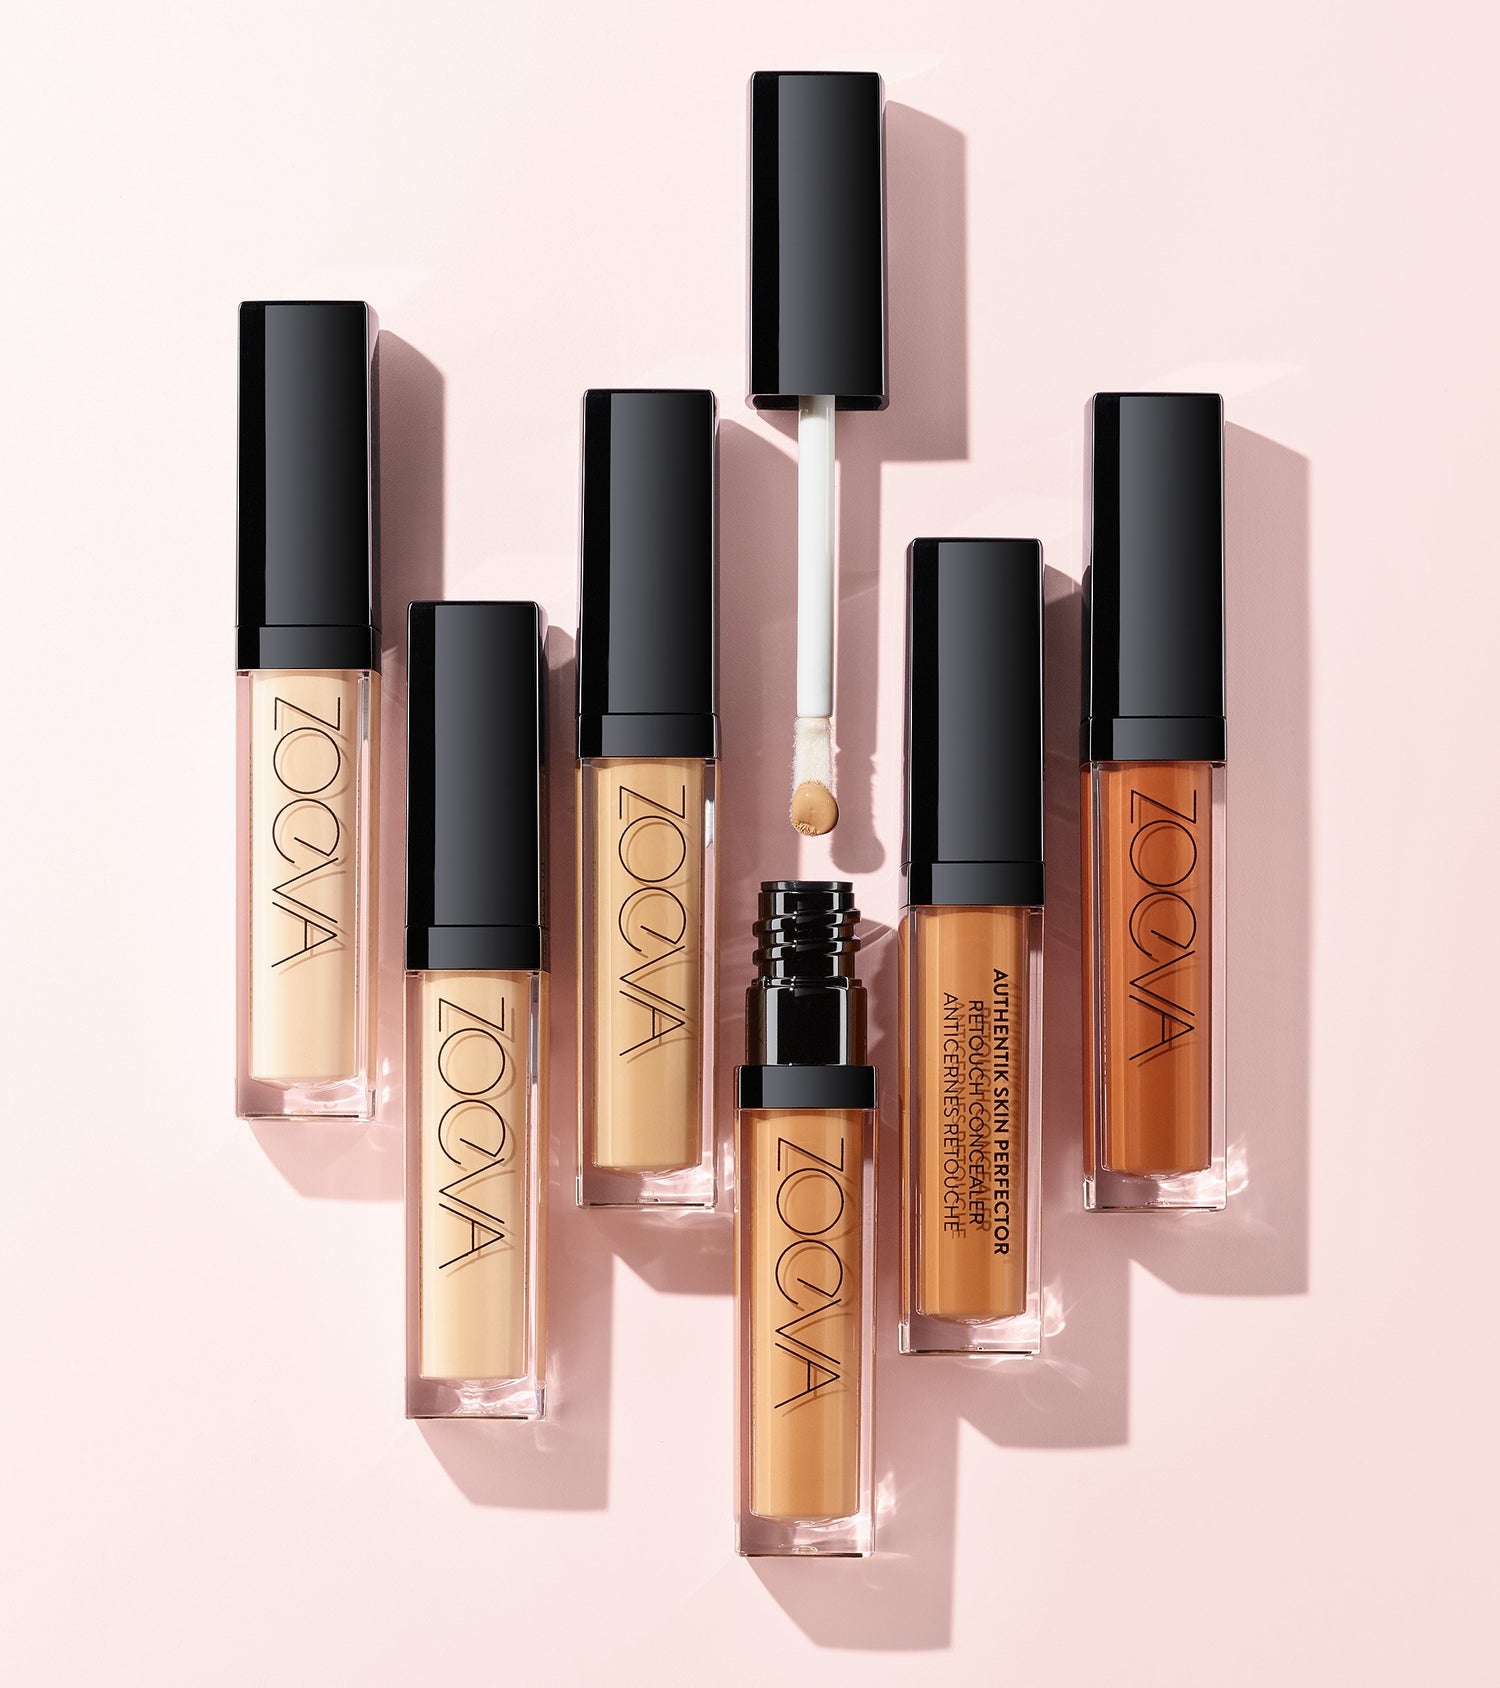 AUTHENTIK SKIN PERFECTOR CONCEALER (170 LIVE) Main Image featured